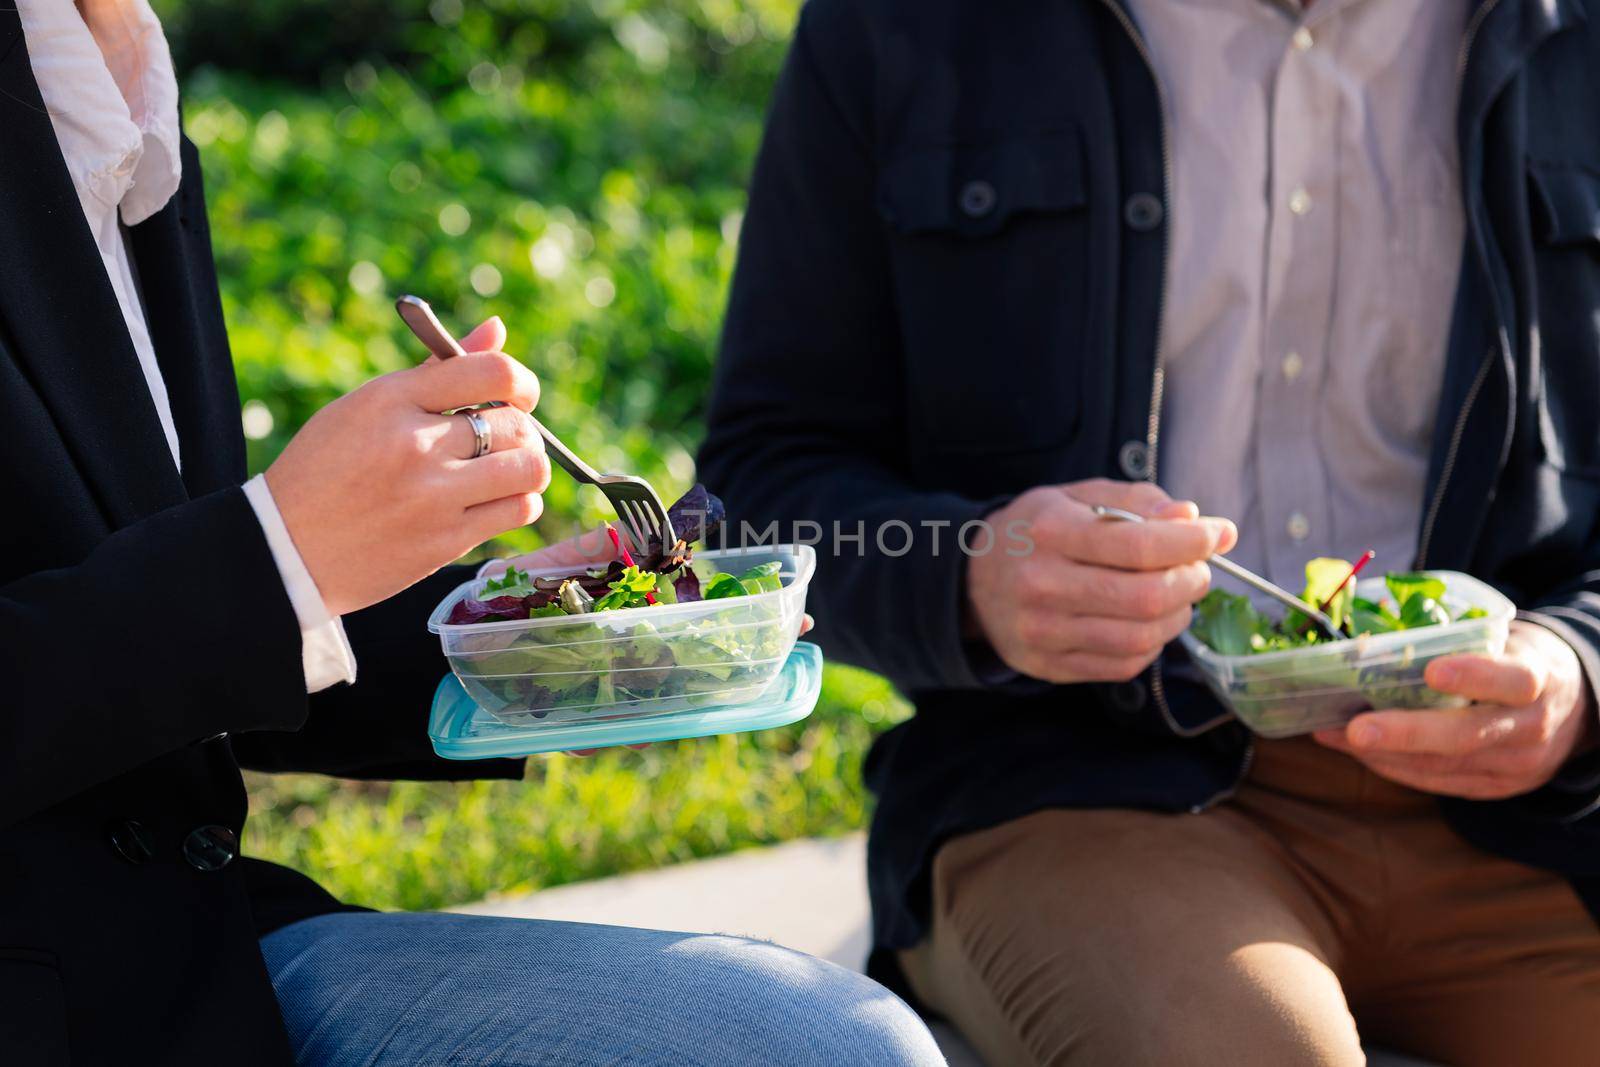 detail of the hands of two people eating a salad in a park during a work break, concept of healthy fast food at work